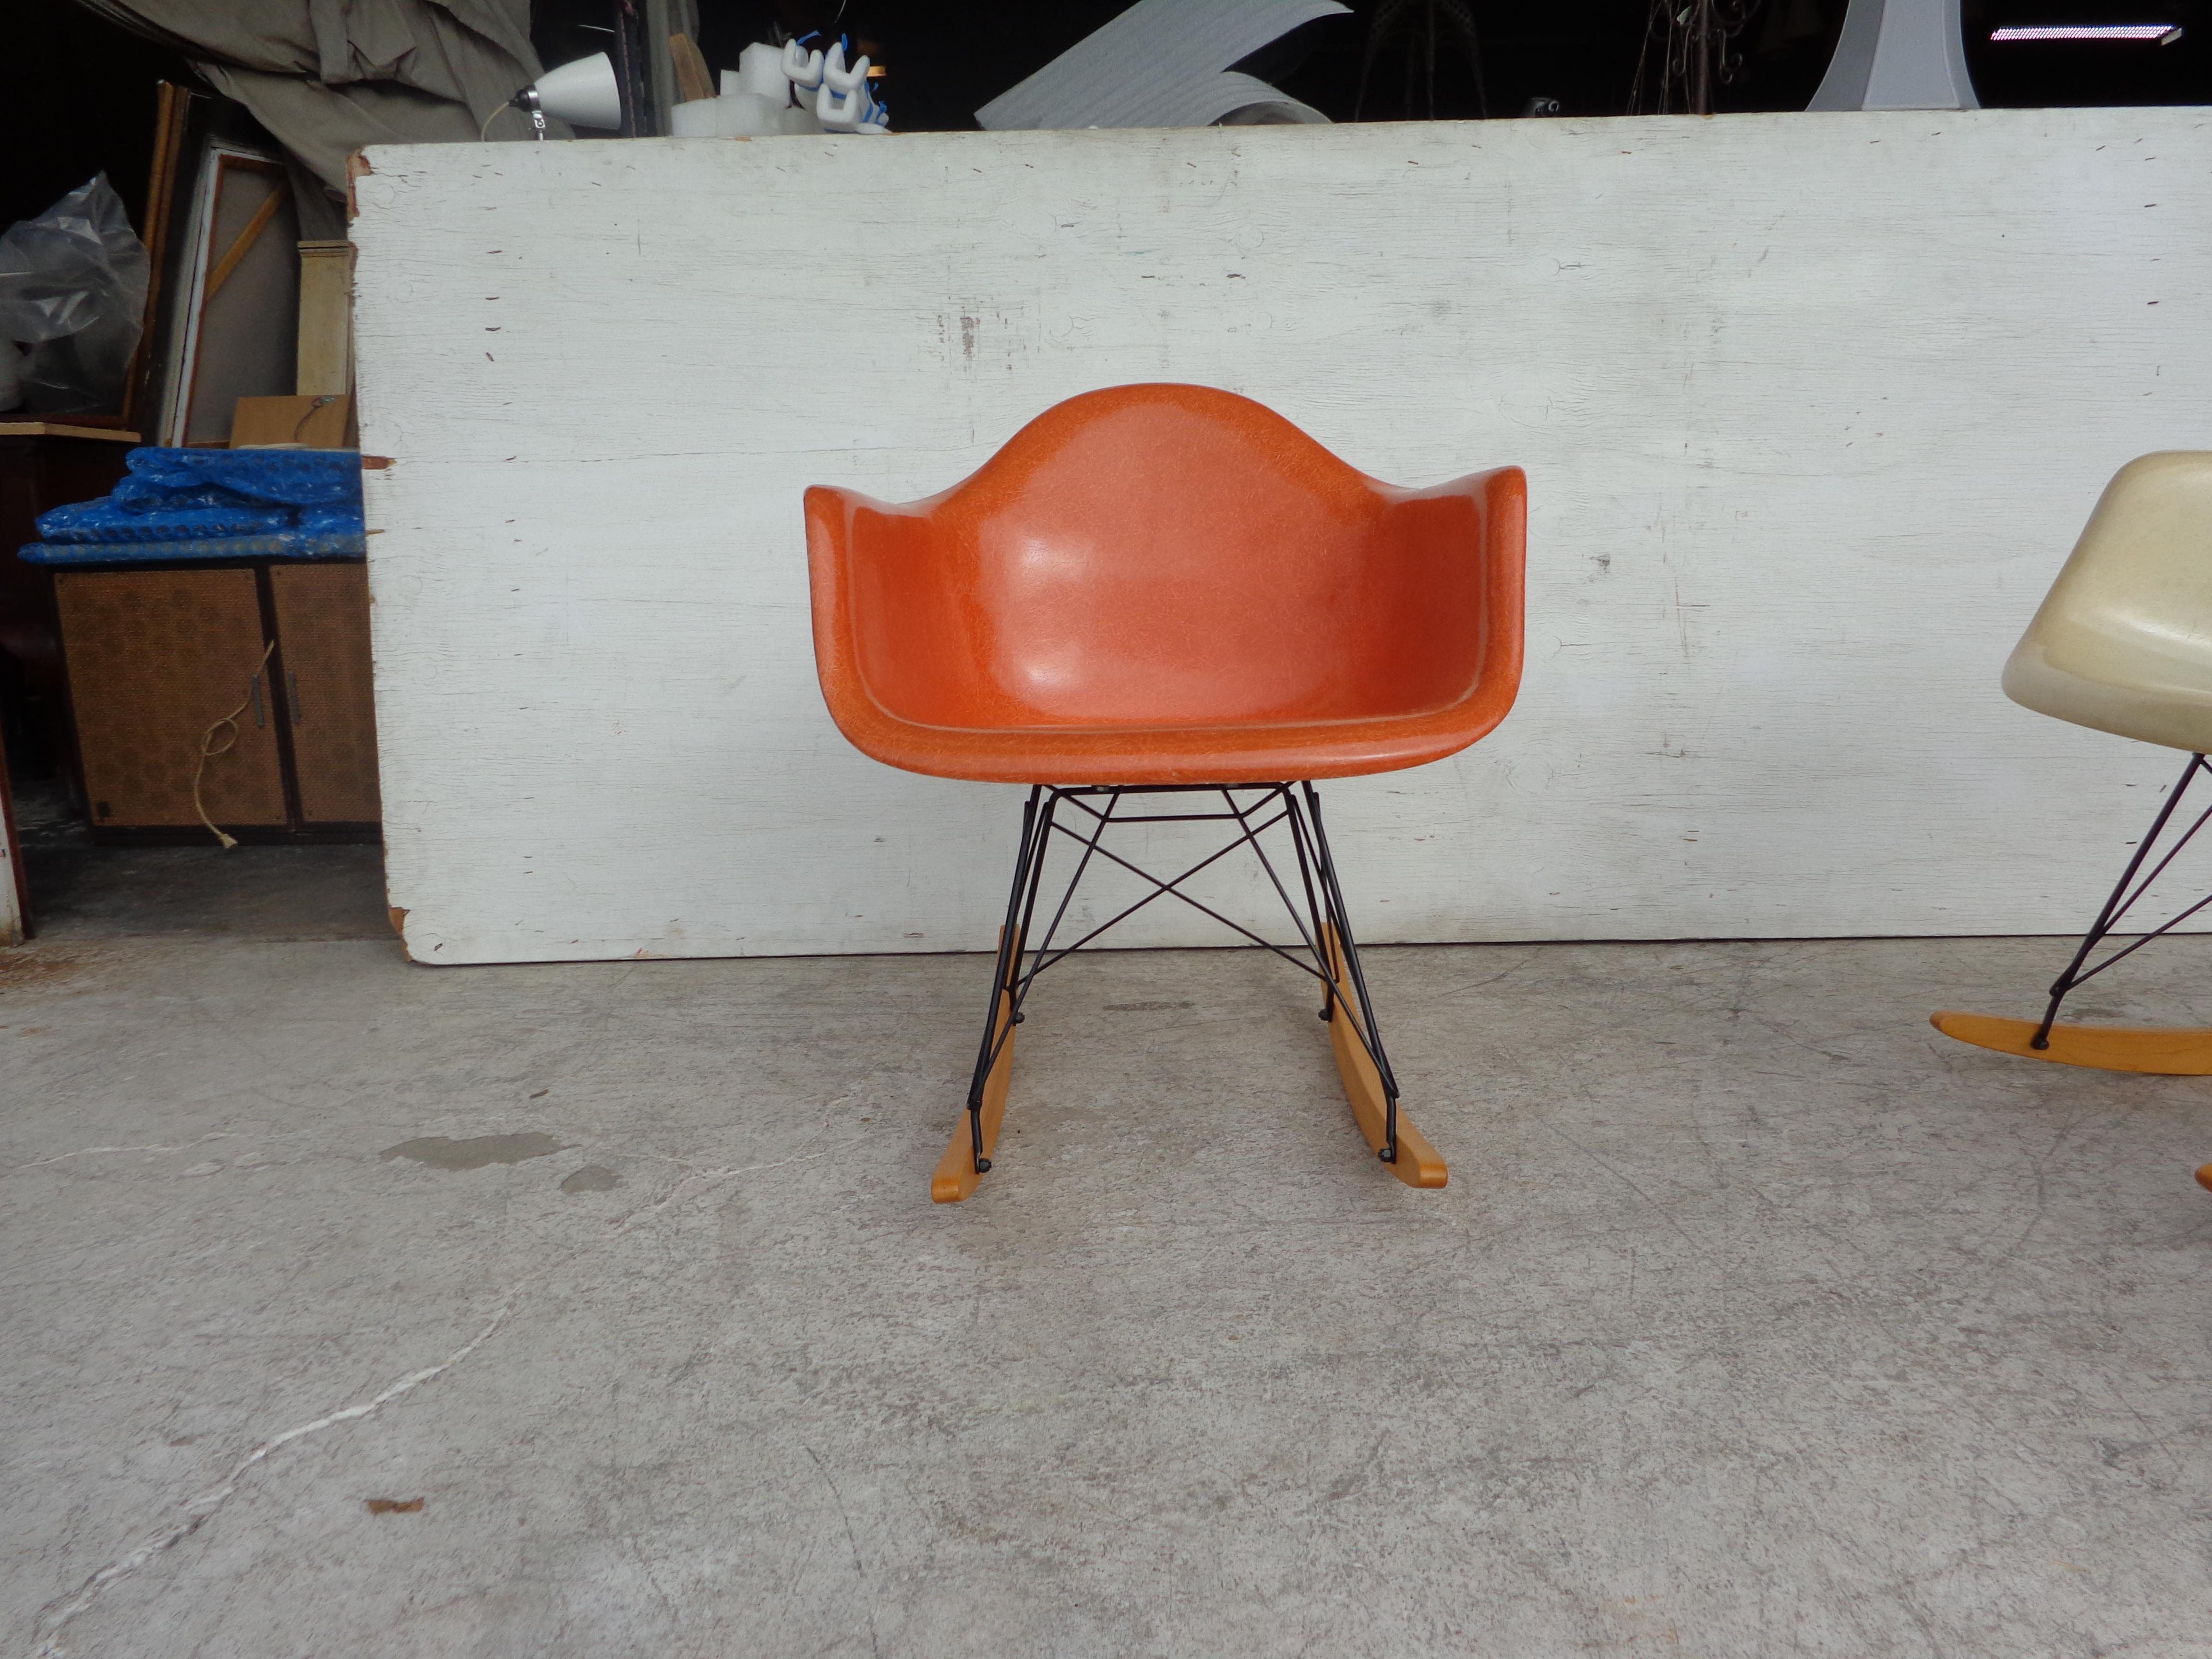 Herman Miller shell fiberglass rocker
Manufactured in the 1960s-1970s this rocker is one of the most iconic designs from Charles and Ray Eames.
 
RAR rocking chair by Charles and Ray Eames and manufactured by Herman Miller. Bright orange shell in